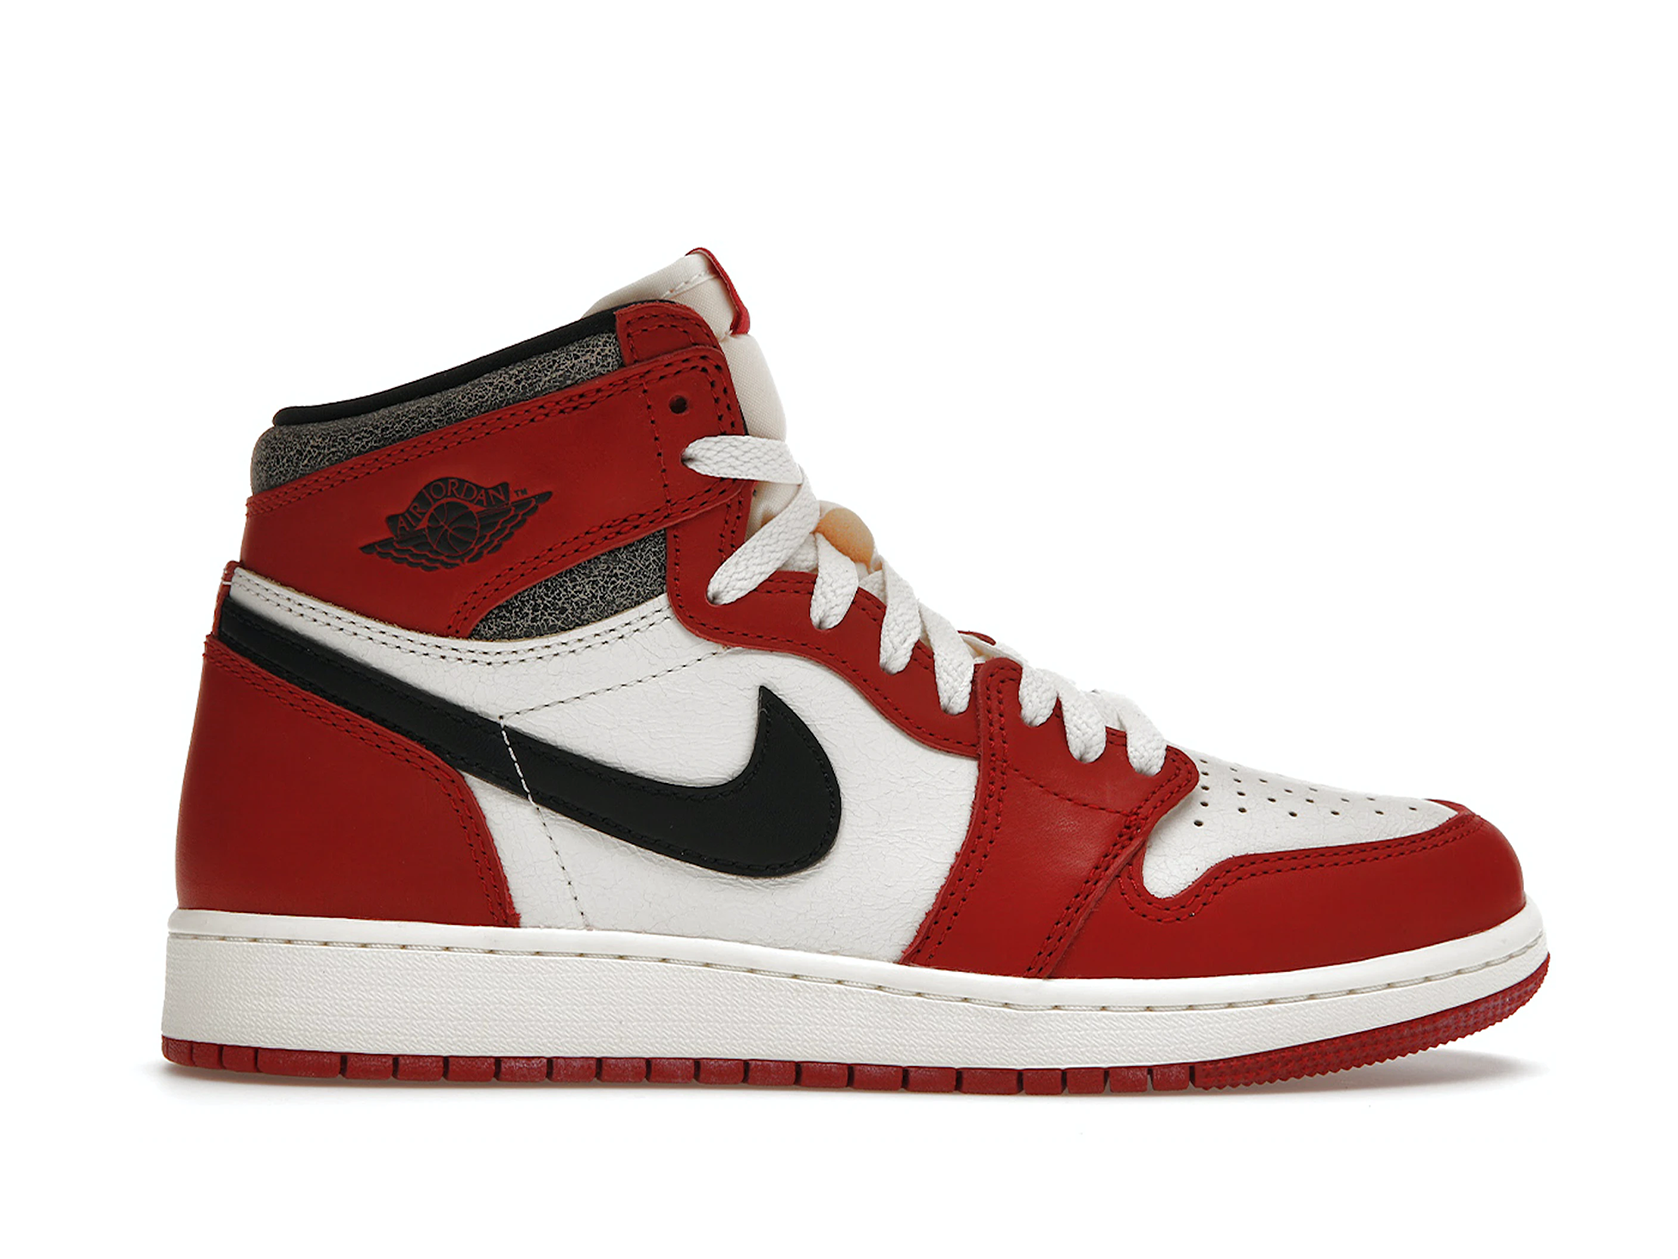 Nike Air Jordan 1 Retro High OG Chicago Lost and Found (GS